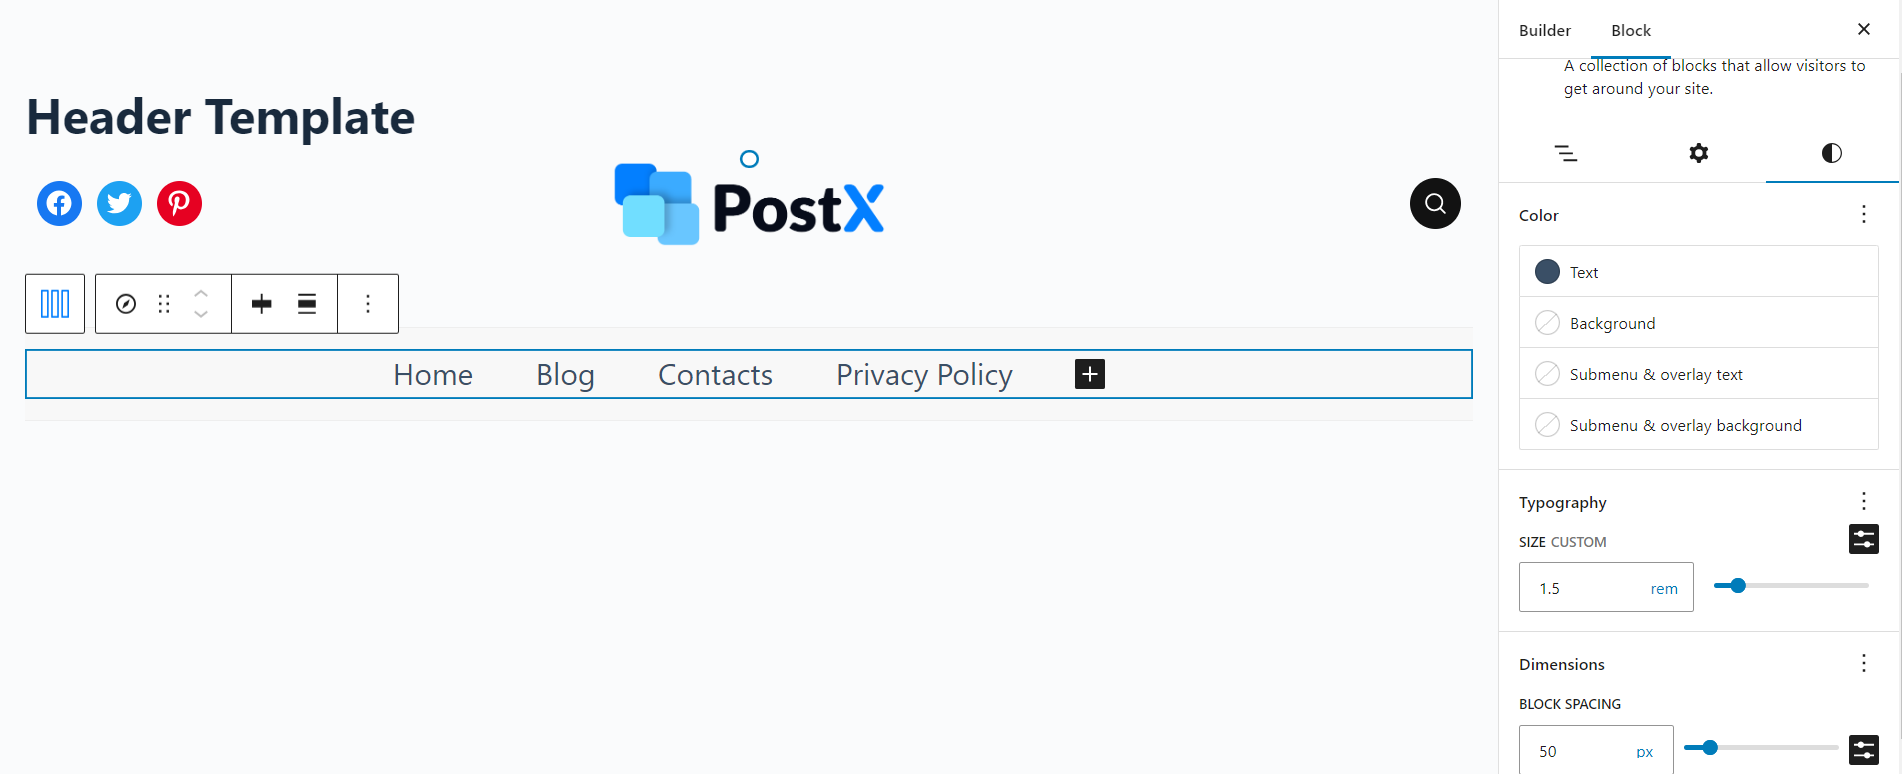 Creating a New Header Template using the PostX Site Builder